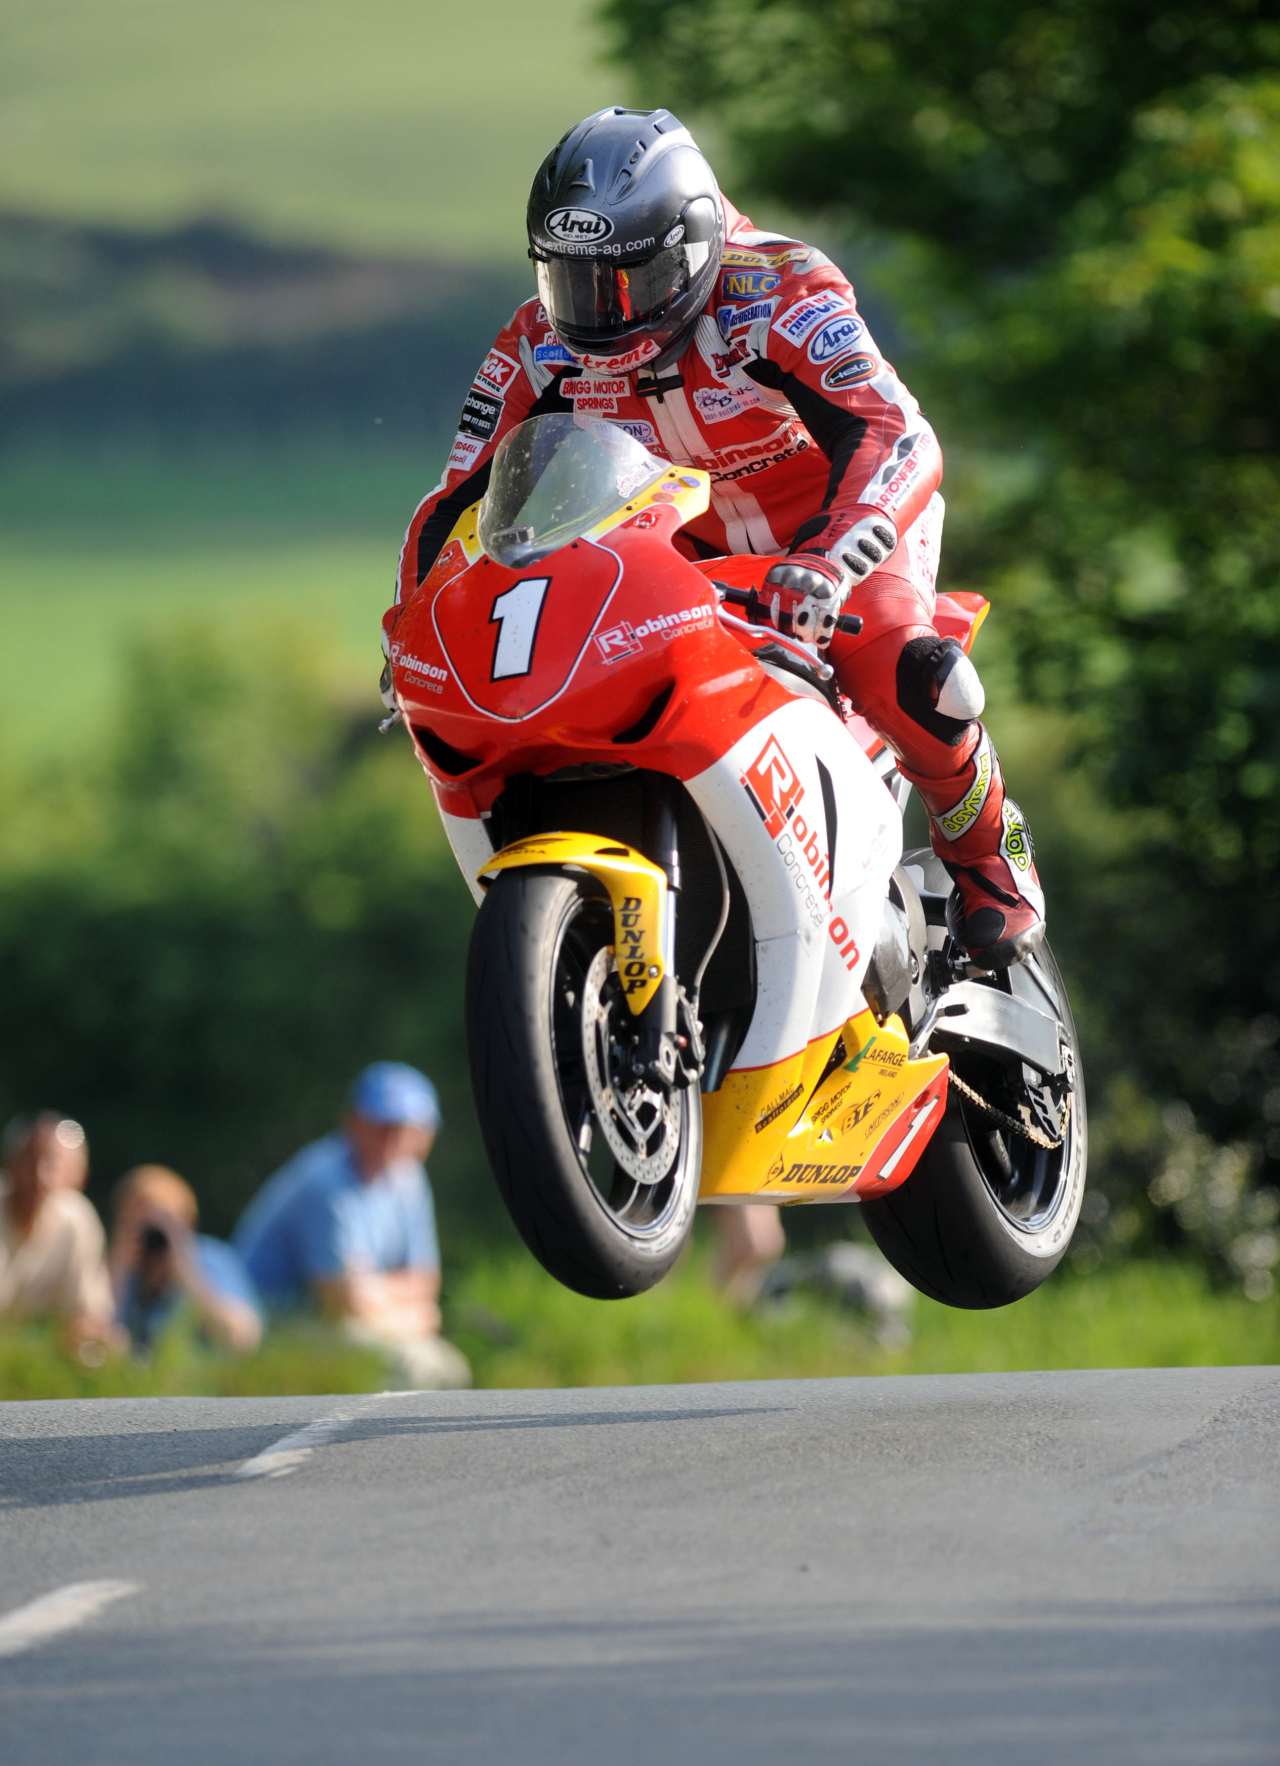 S Practice Session For The Isle Of Man TT. PICTURE BY STEPHEN